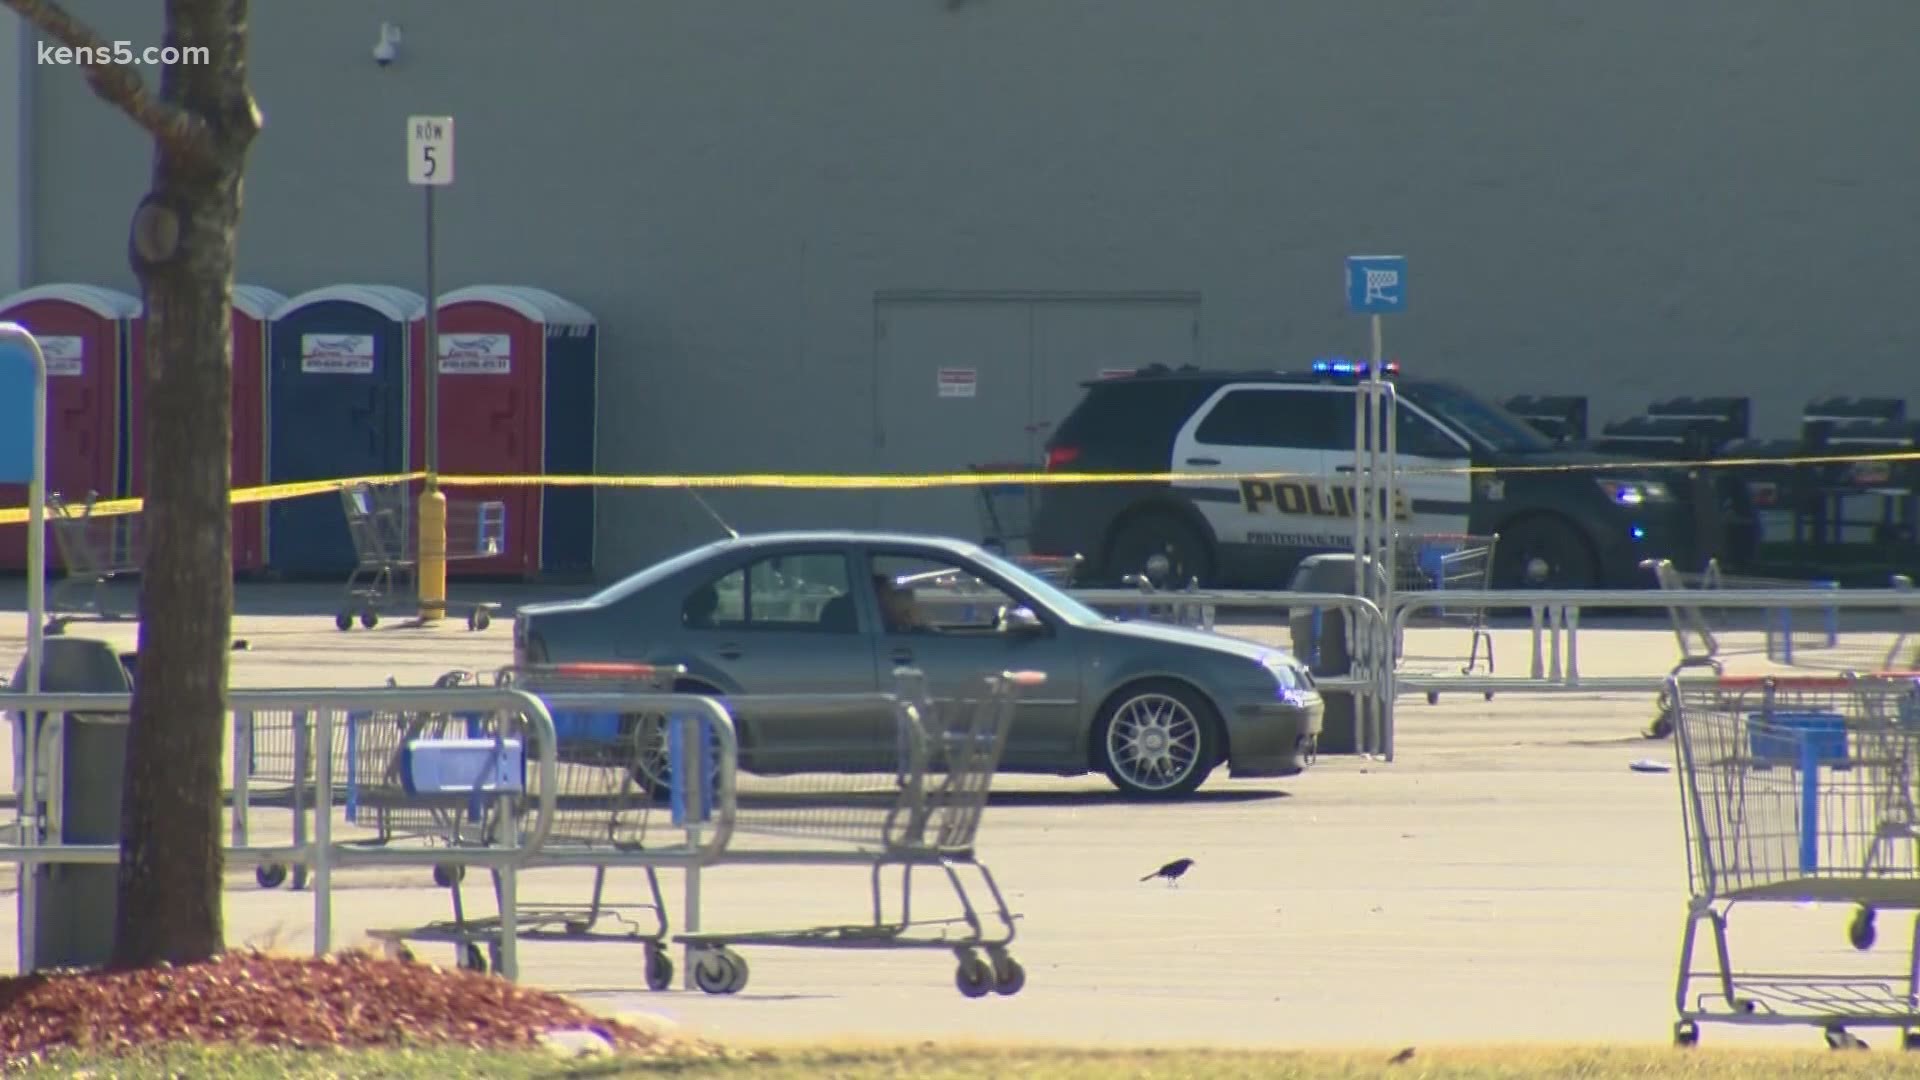 SAISD officer Manuel Espinoza was working off-duty as a security guard at the Walmart on 8923 West Military Drive when police say he shot a man who pulled a gun.